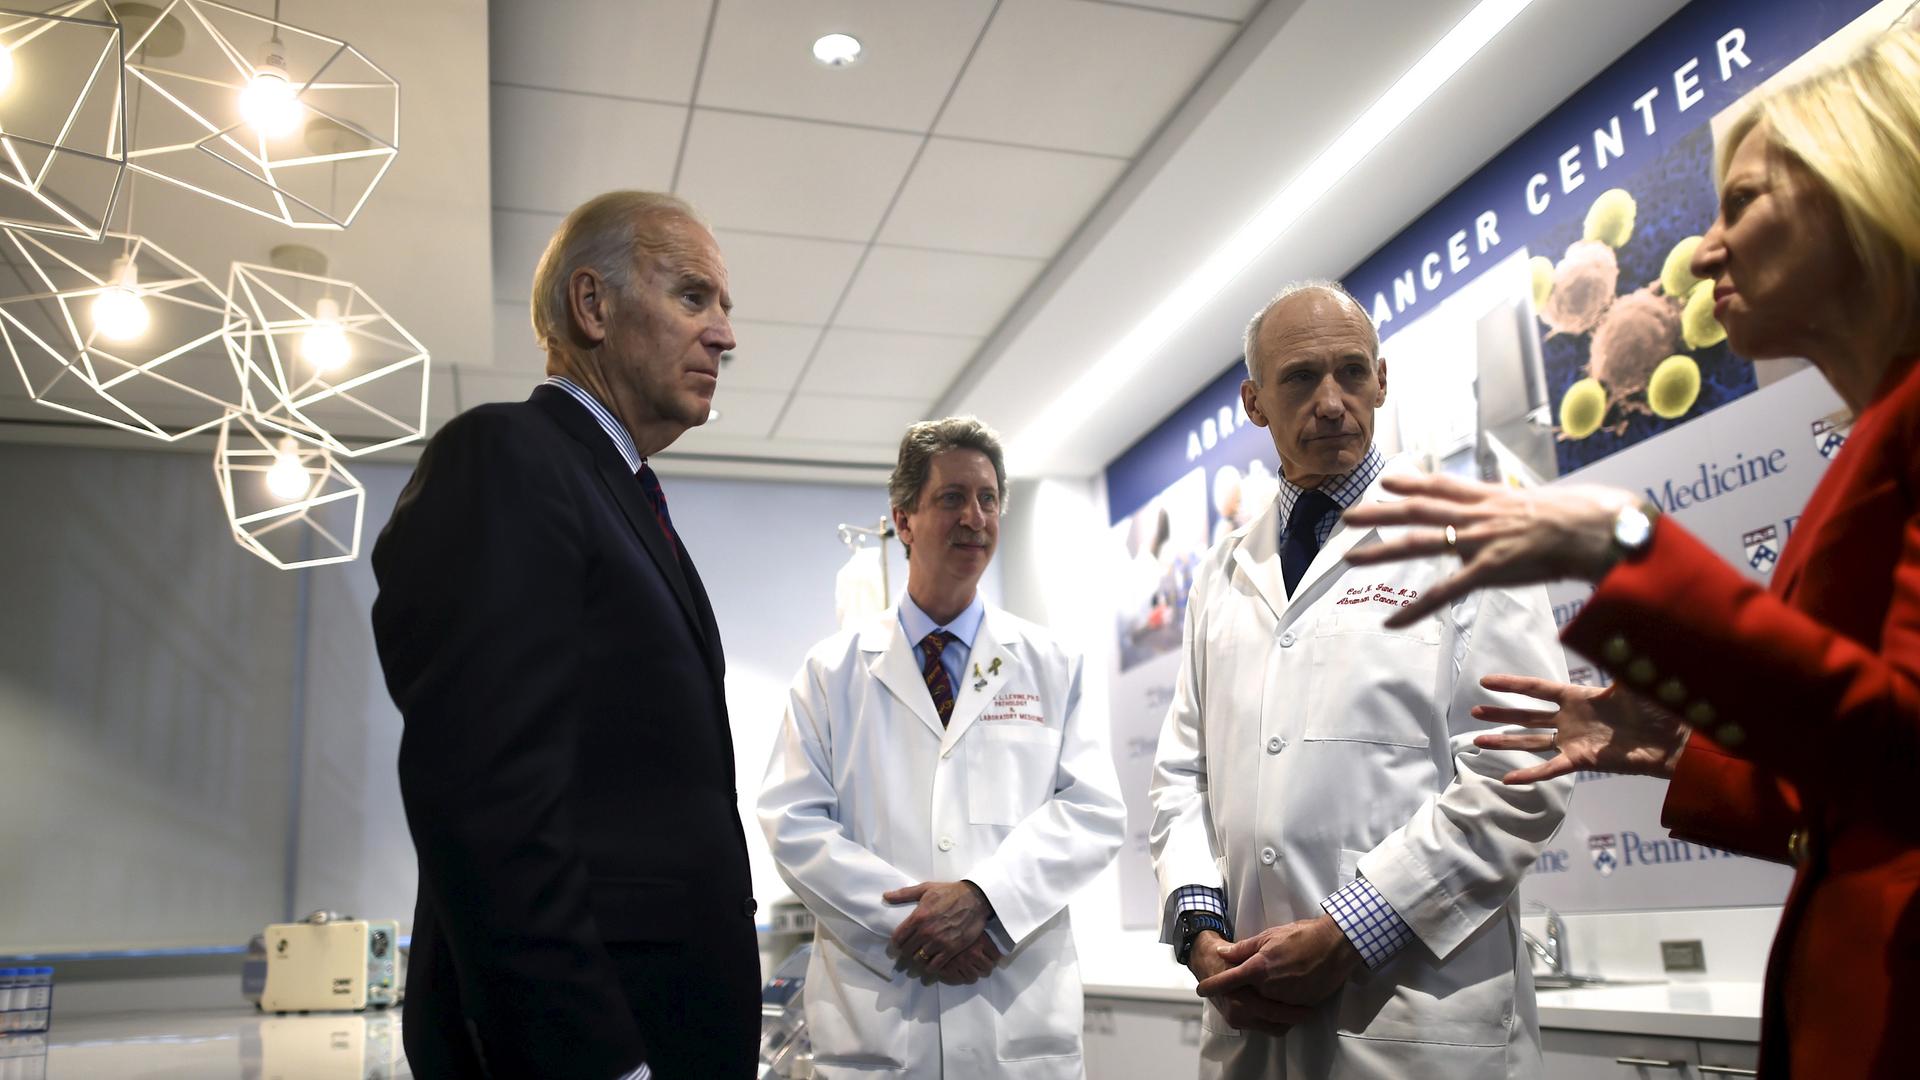 Vice President Joe Biden (L) meets with (C-R) Dr. Bruce Levine, Dr. Carl June, and University of Pennsylvania President Amy Gutmann while touring the University of Pennsylvania, Perelman School of Medicine and Abramson Cancer Center. During the State of t